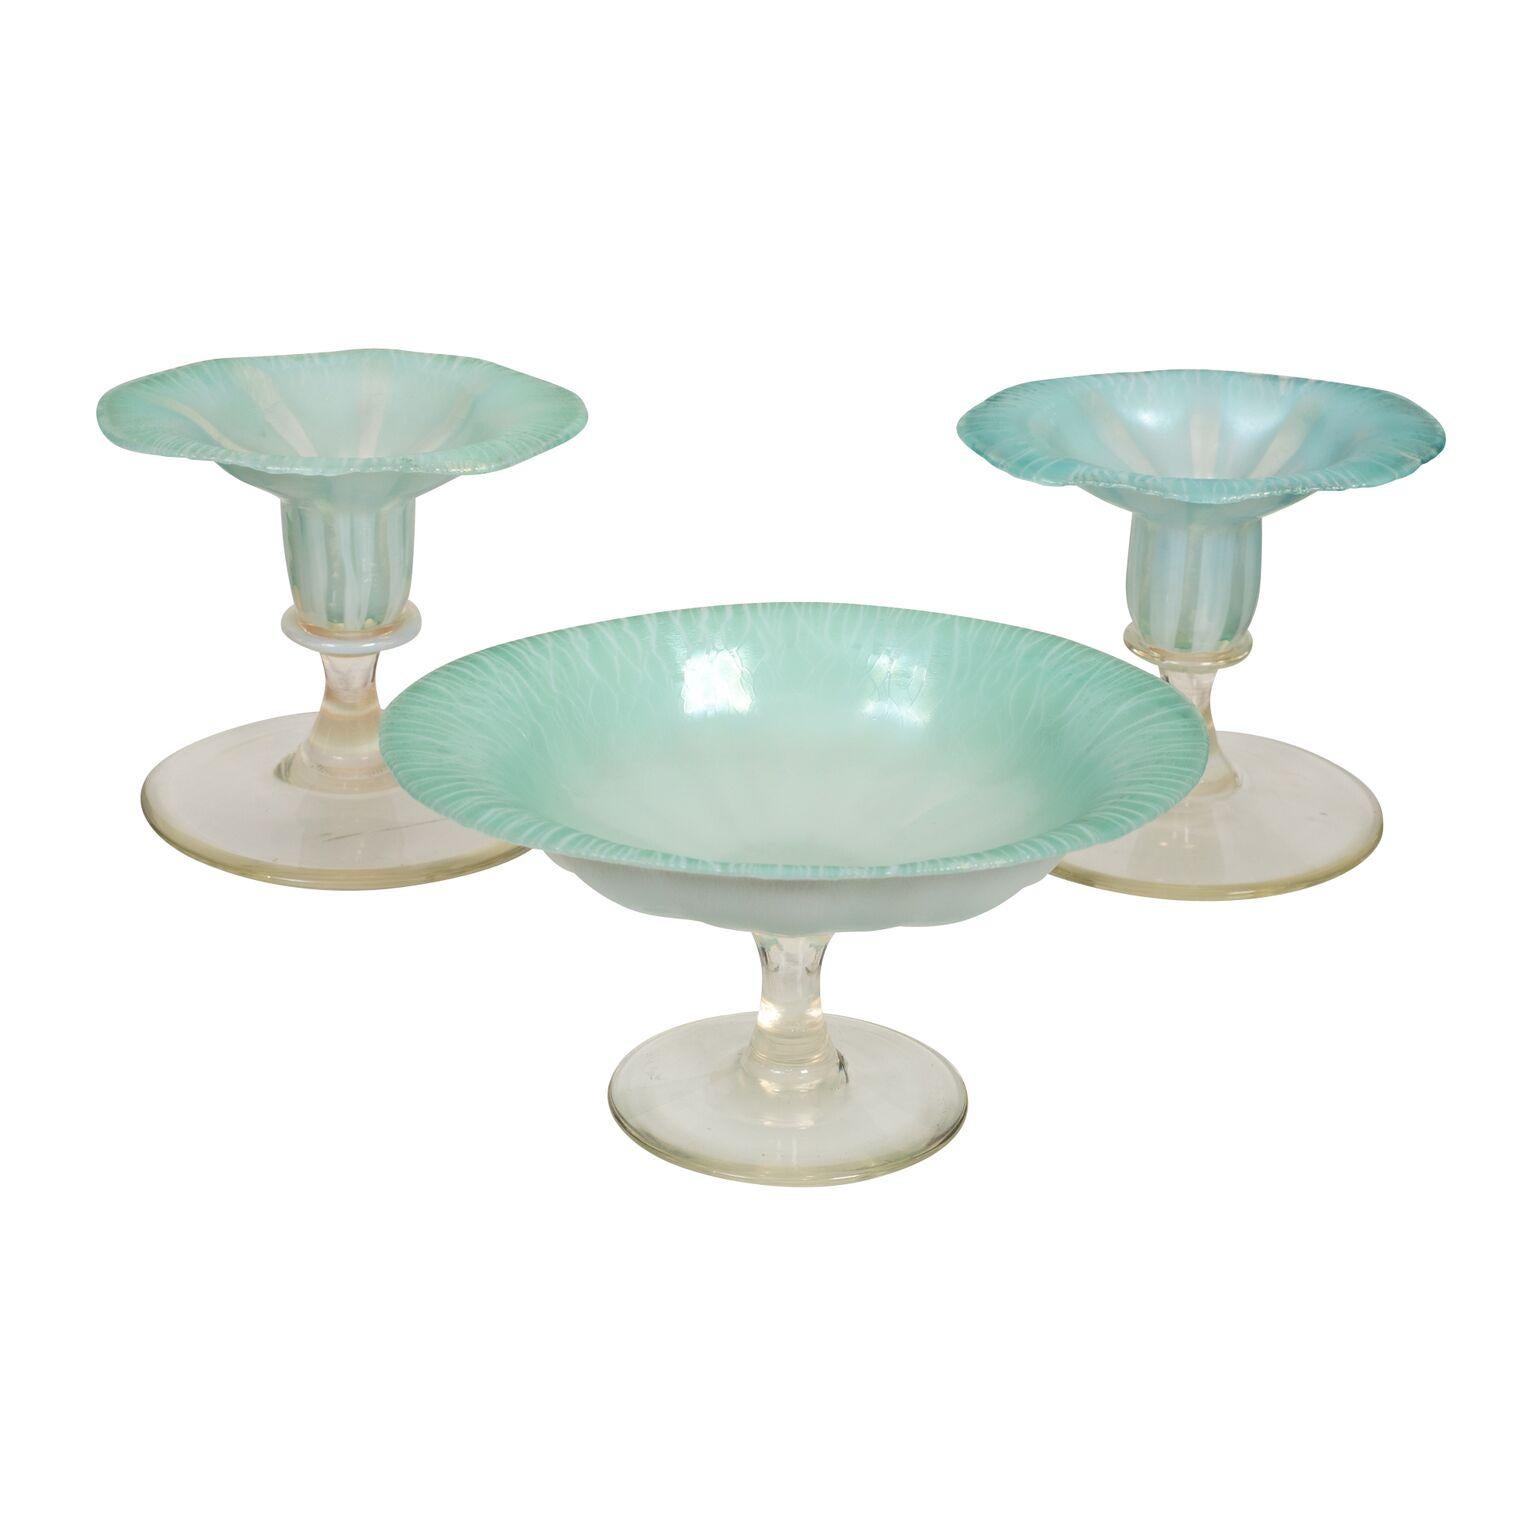 Pastel Tiffany Favrile Glass Three Piece Garniture In Good Condition For Sale In West Palm Beach, FL